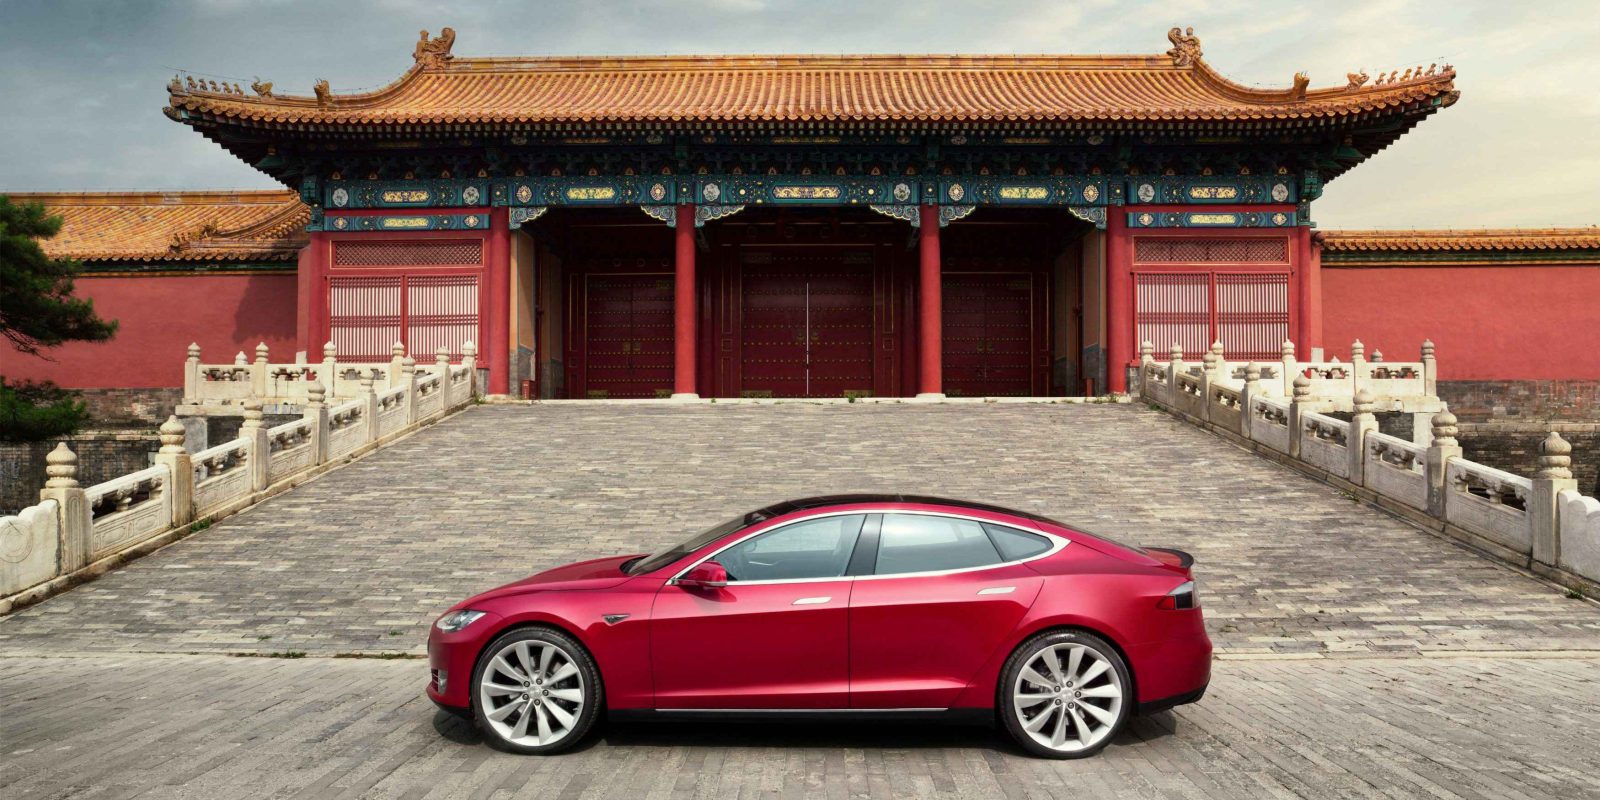 Tesla sells 200,000th auto, starting phaseout of federal tax credits